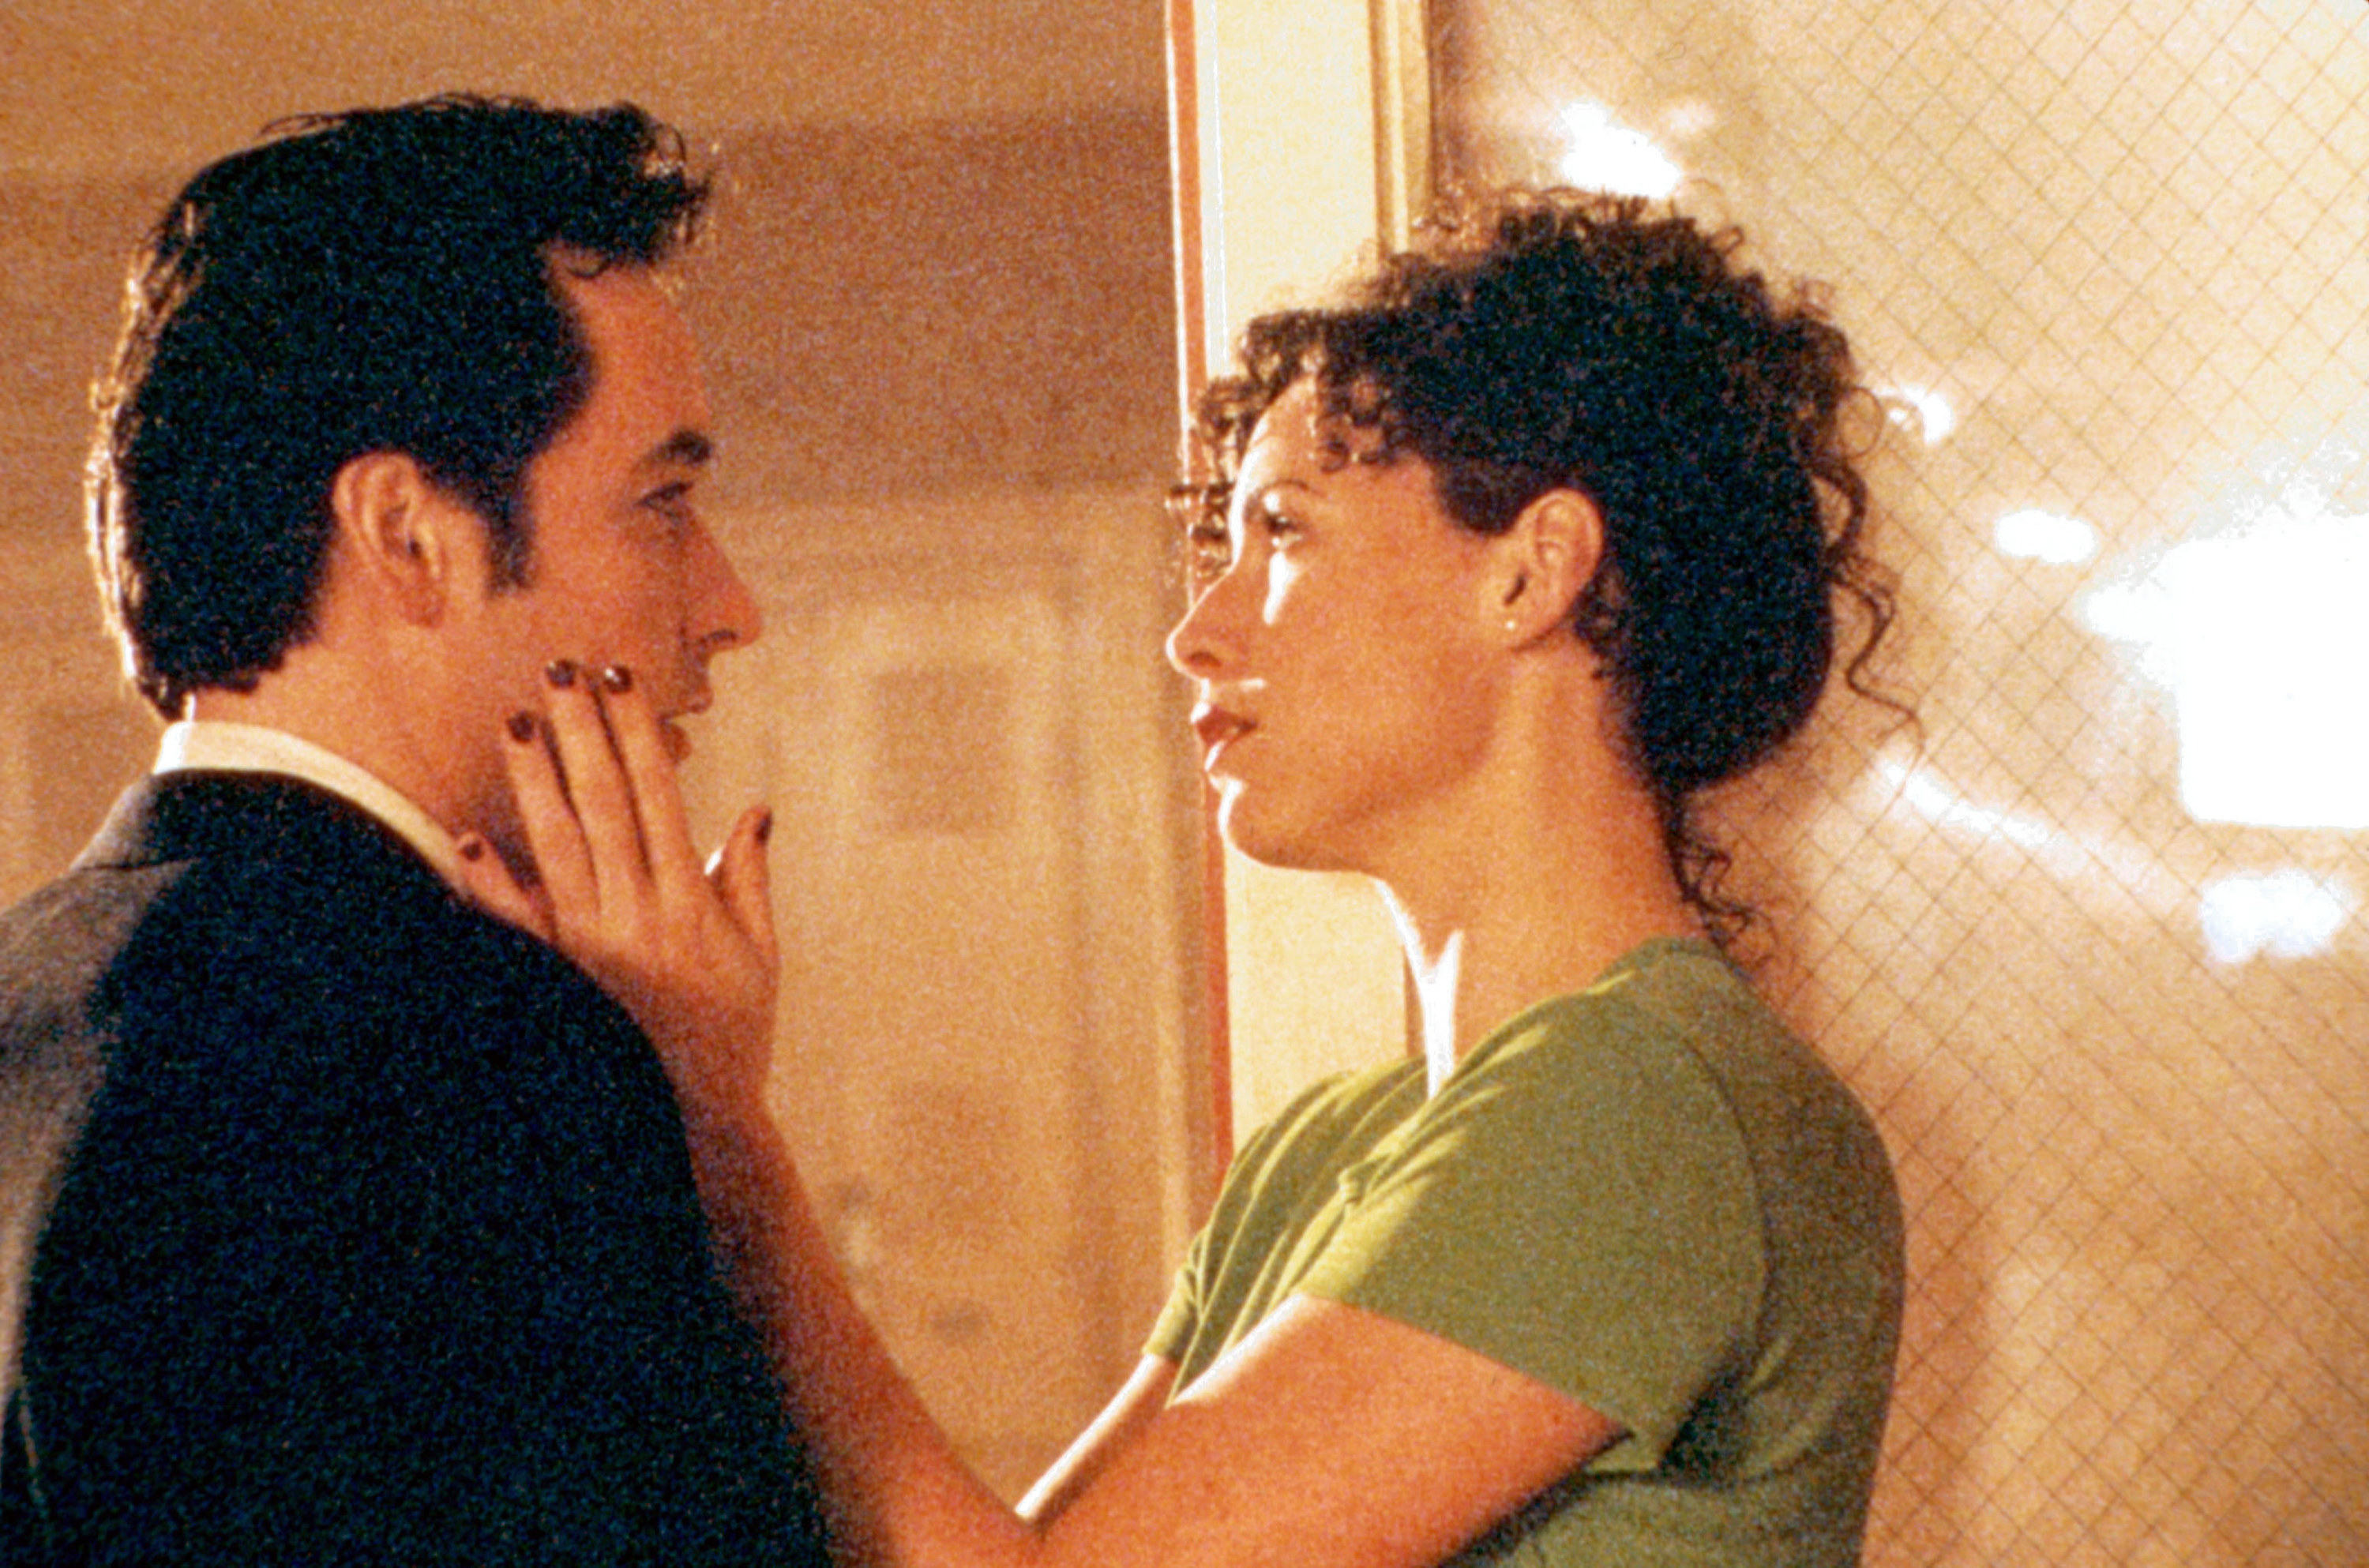 John Cusack&#x27;s face being held by Minnie Driver.